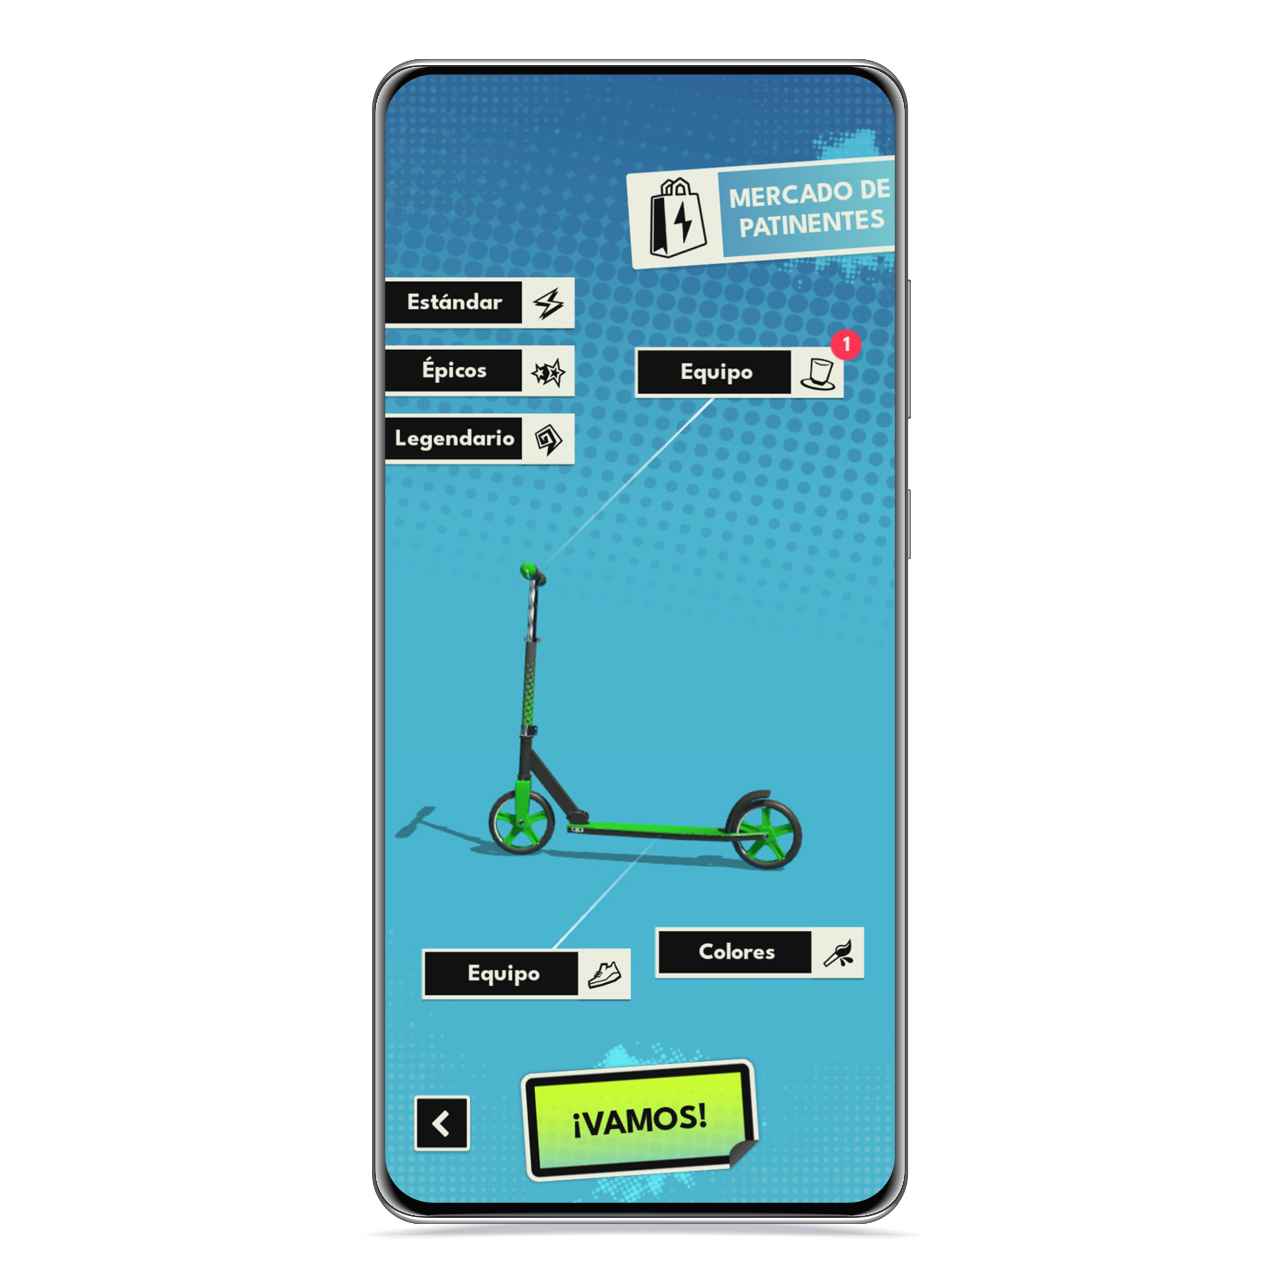 Personalization of the Touchgrind scooter